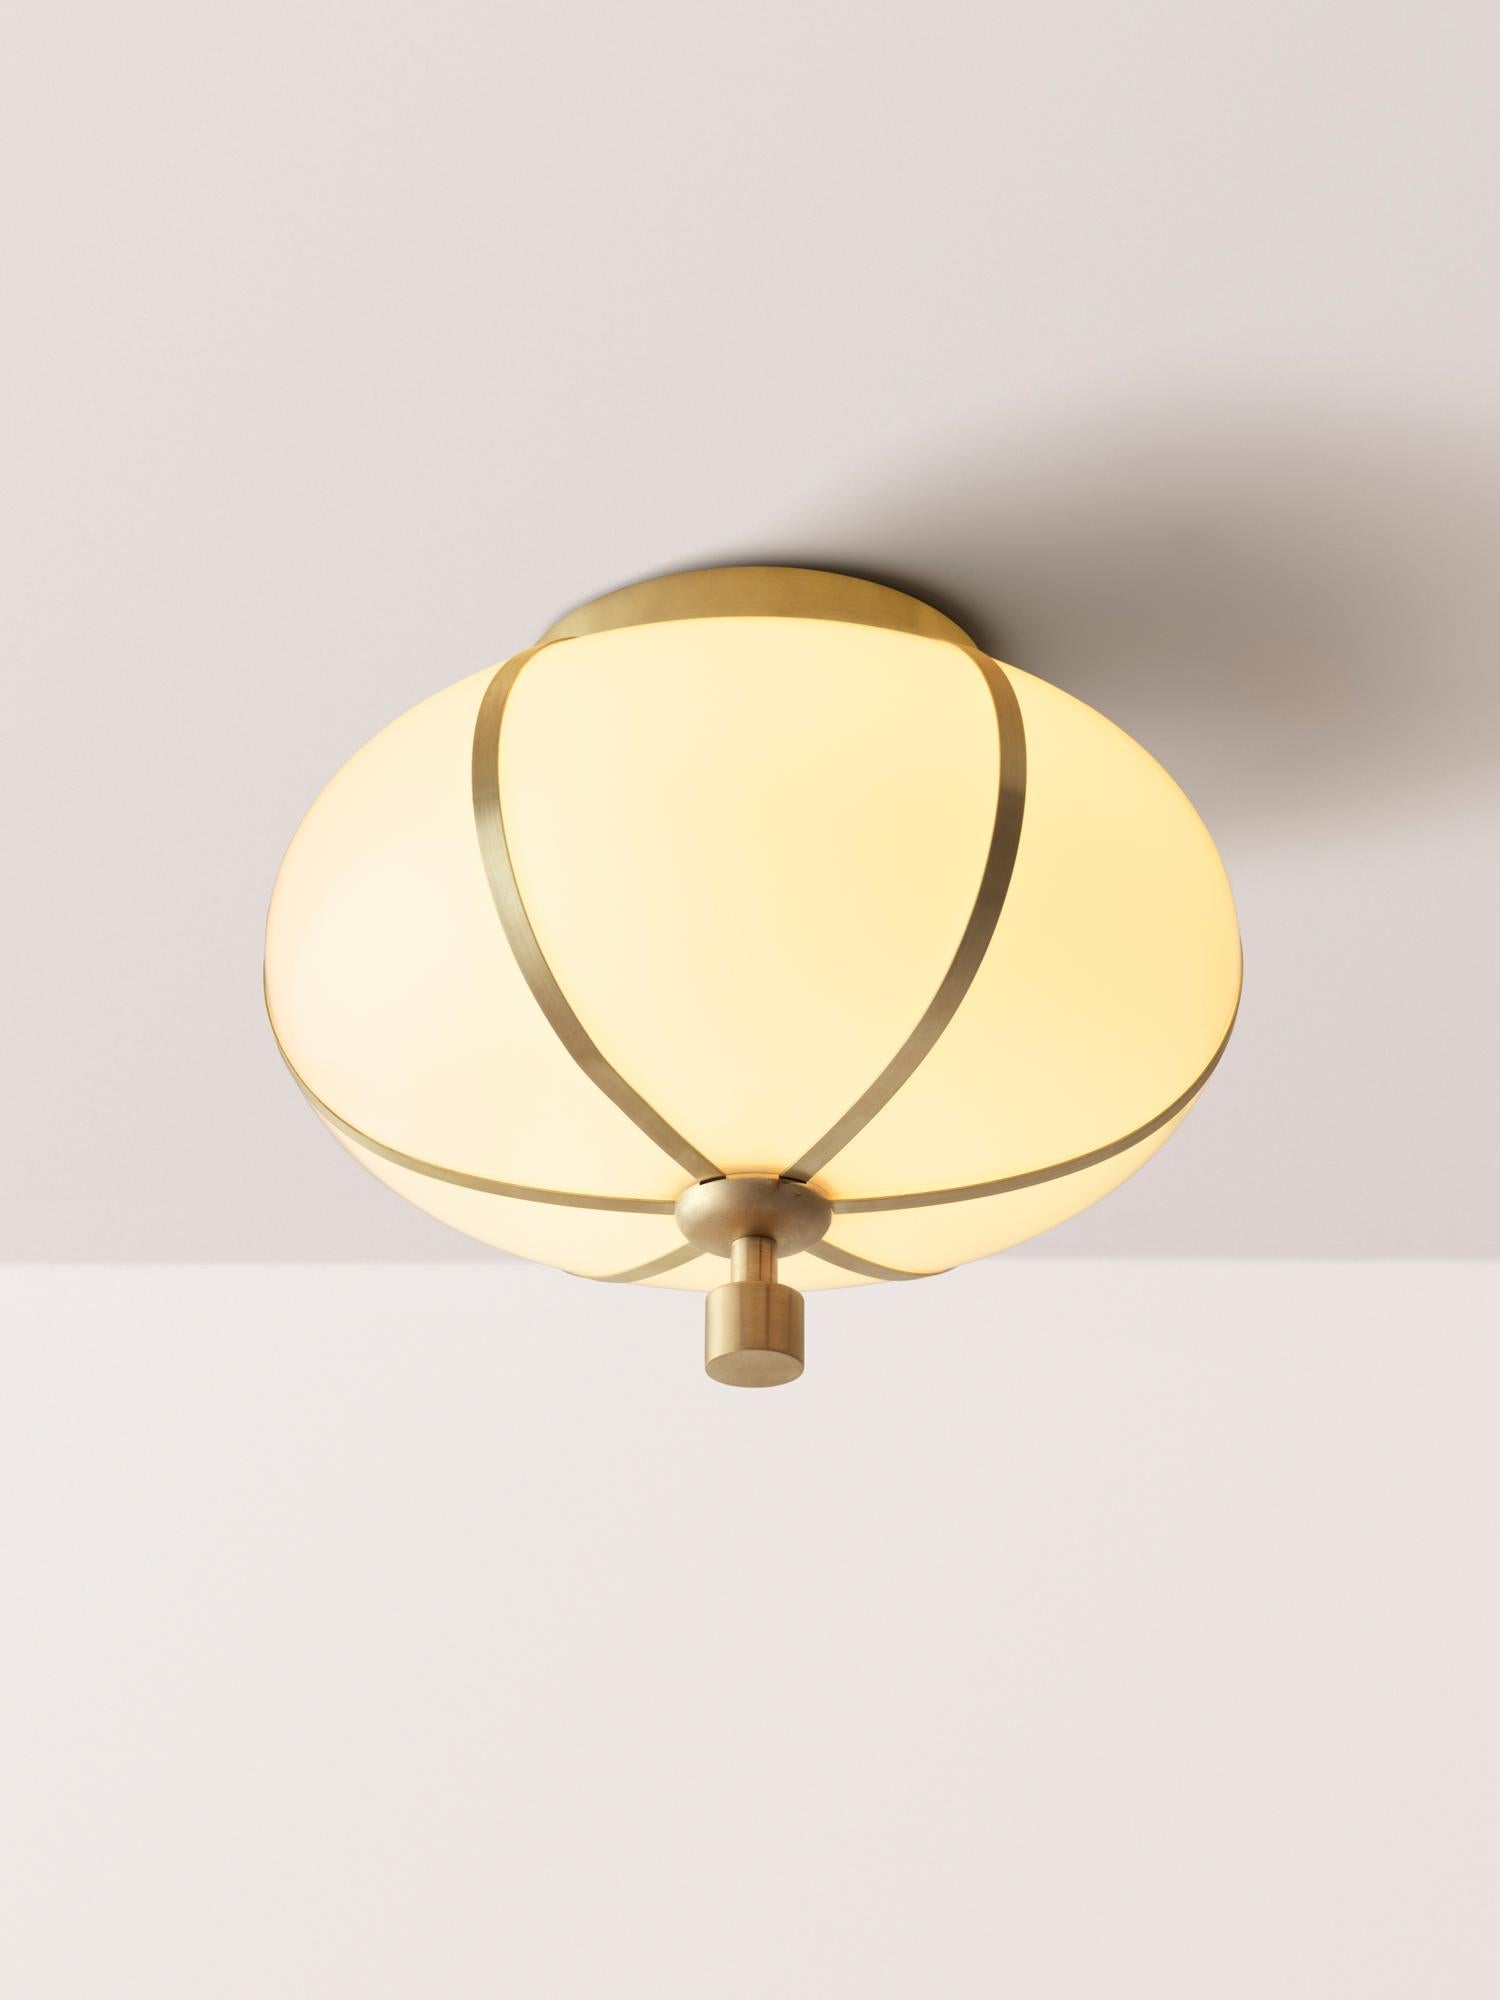 Rib Flush Mount - Small Ellipse in Satin Brass In New Condition For Sale In New York, NY